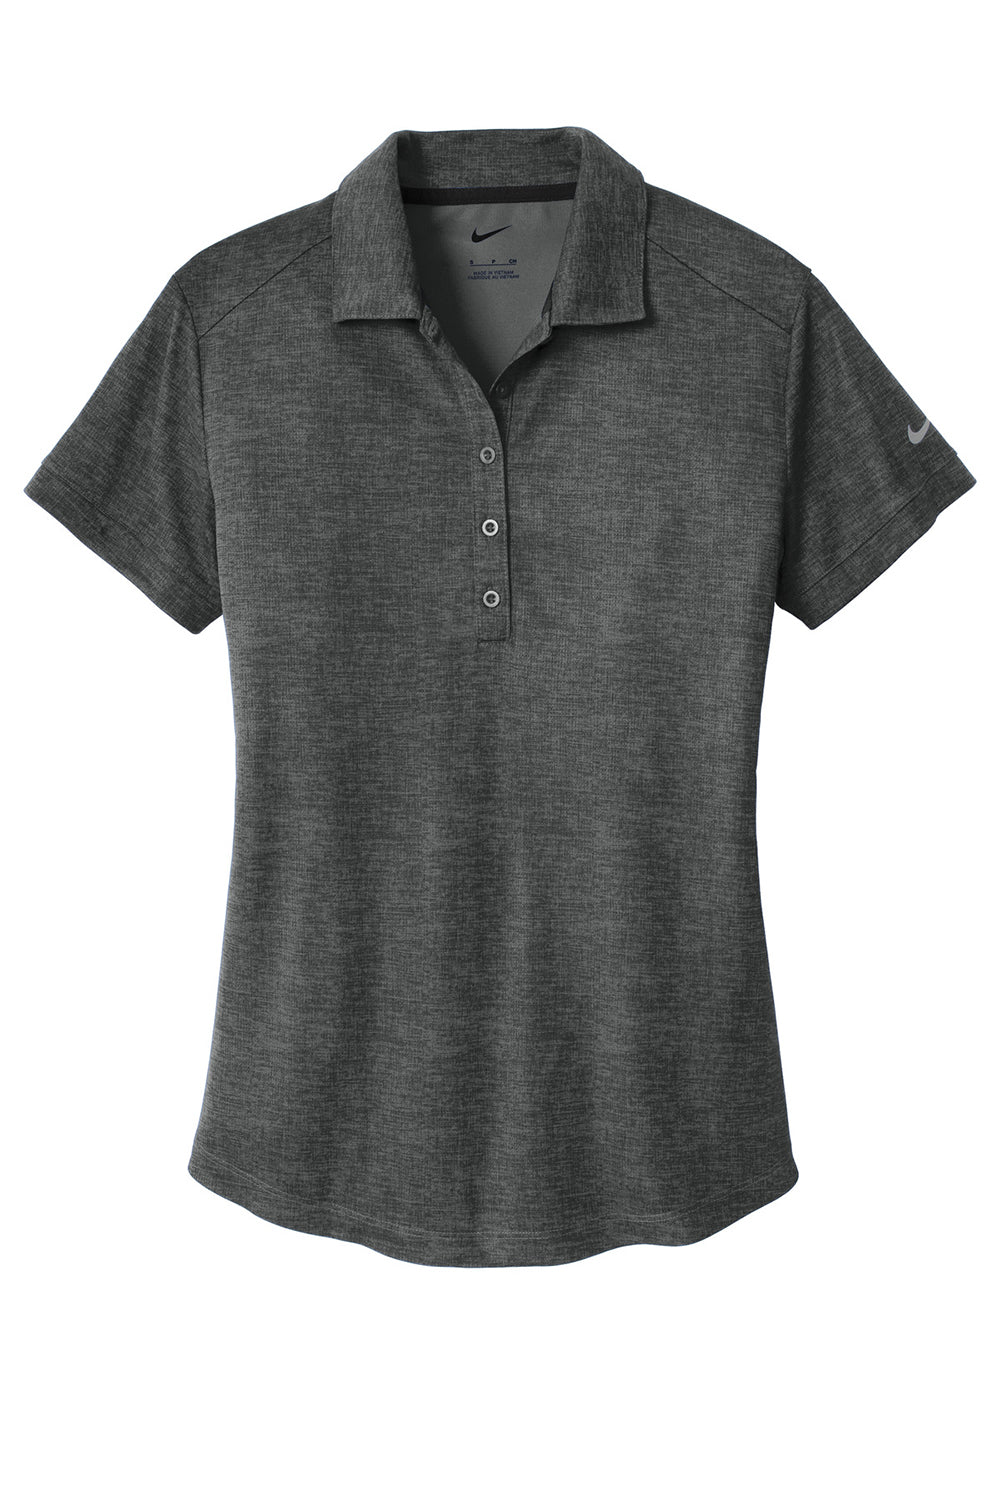 Nike 838961 Womens Dri-Fit Moisture Wicking Short Sleeve Polo Shirt Anthracite Grey Flat Front